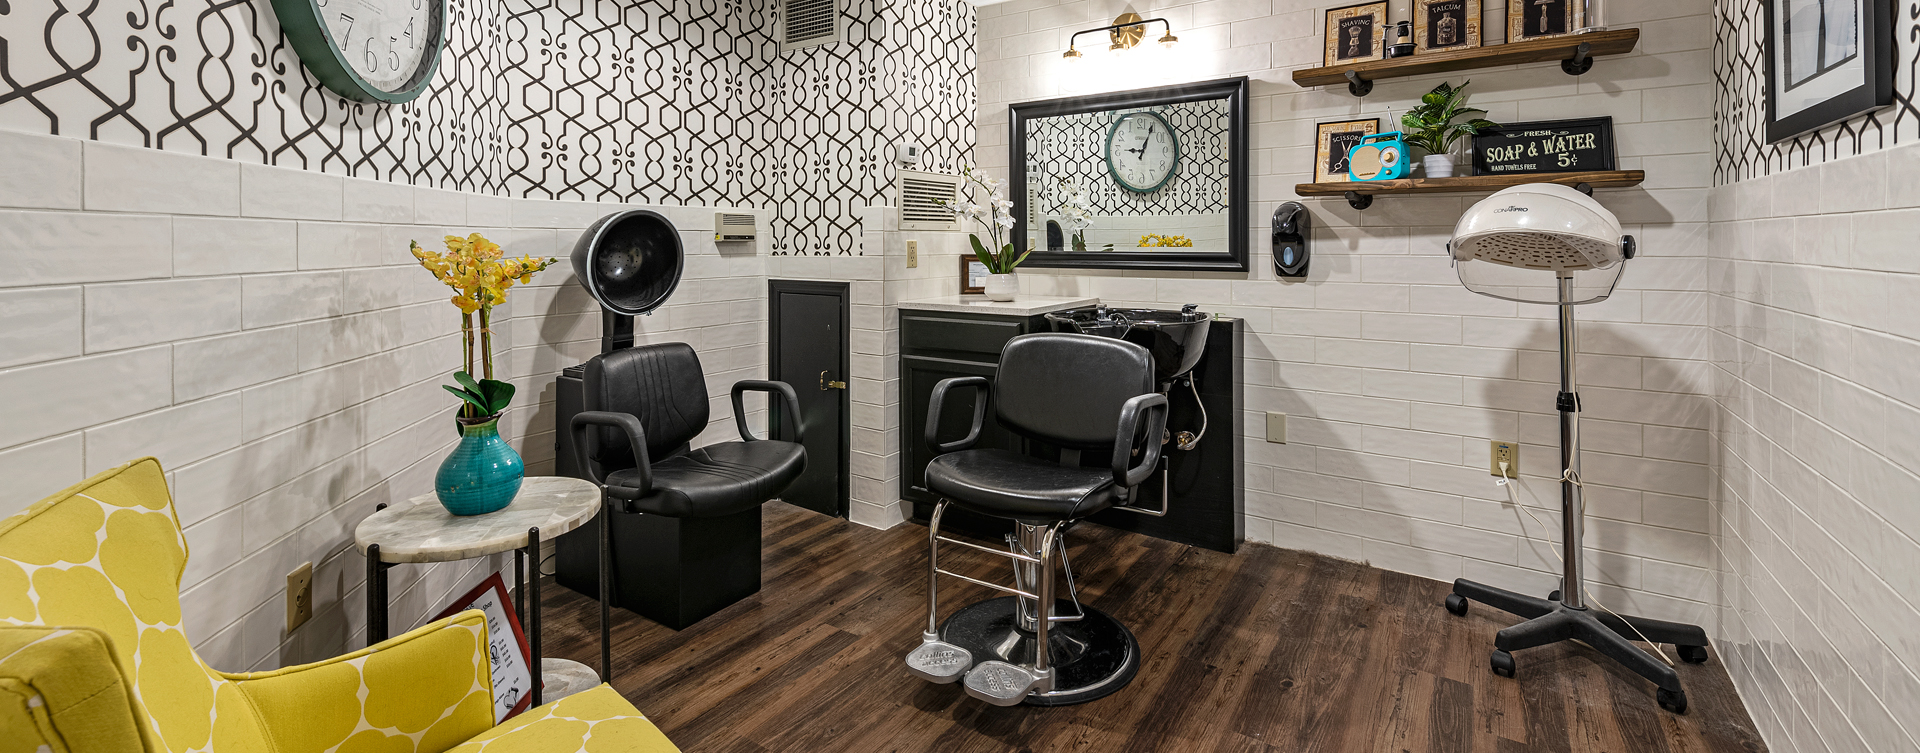 Receive personalized, at-home treatment from our stylist in the salon at Bickford of Bexley